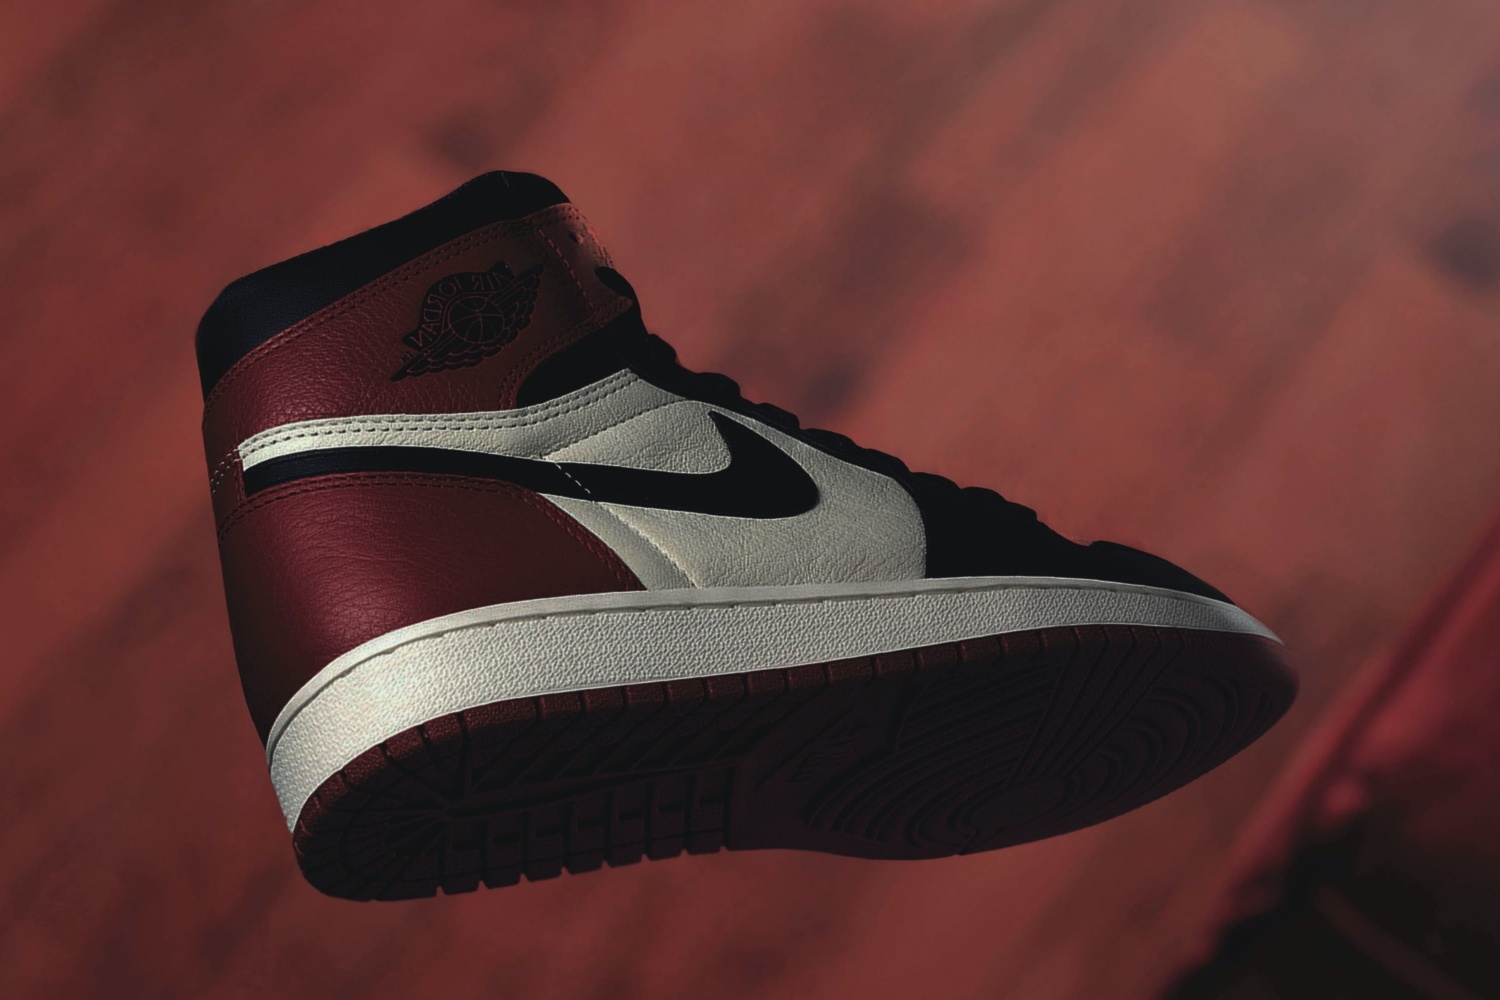 Air Jordan 1 - Available Models and Outlook for 2022